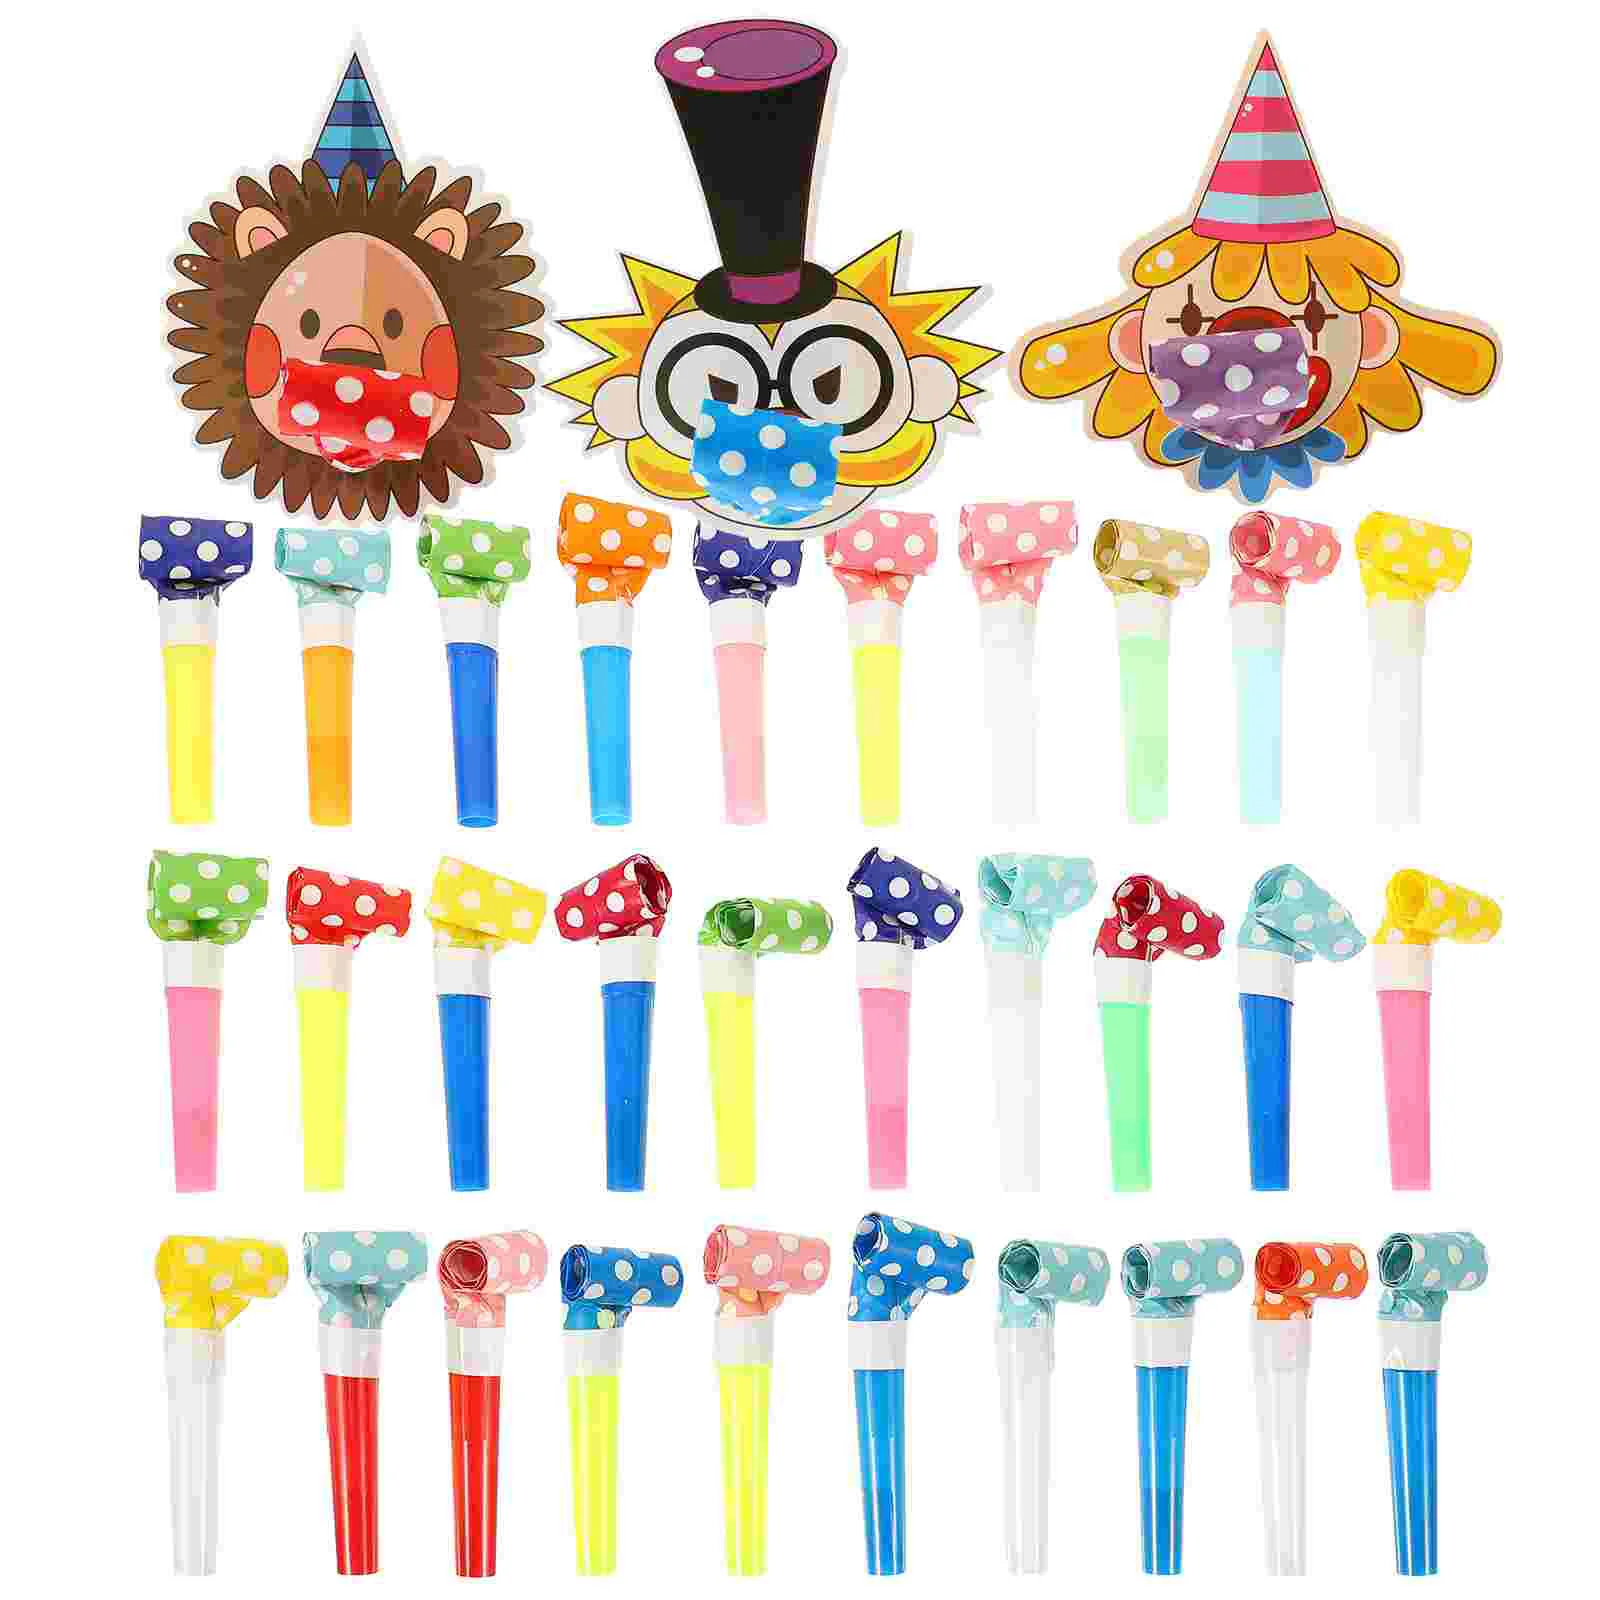 

30 Pcs Kidcraft Playset Cartoon Blowing Dragon Blowouts Noisemakers Party Blowers Kids Birthday Horns Child